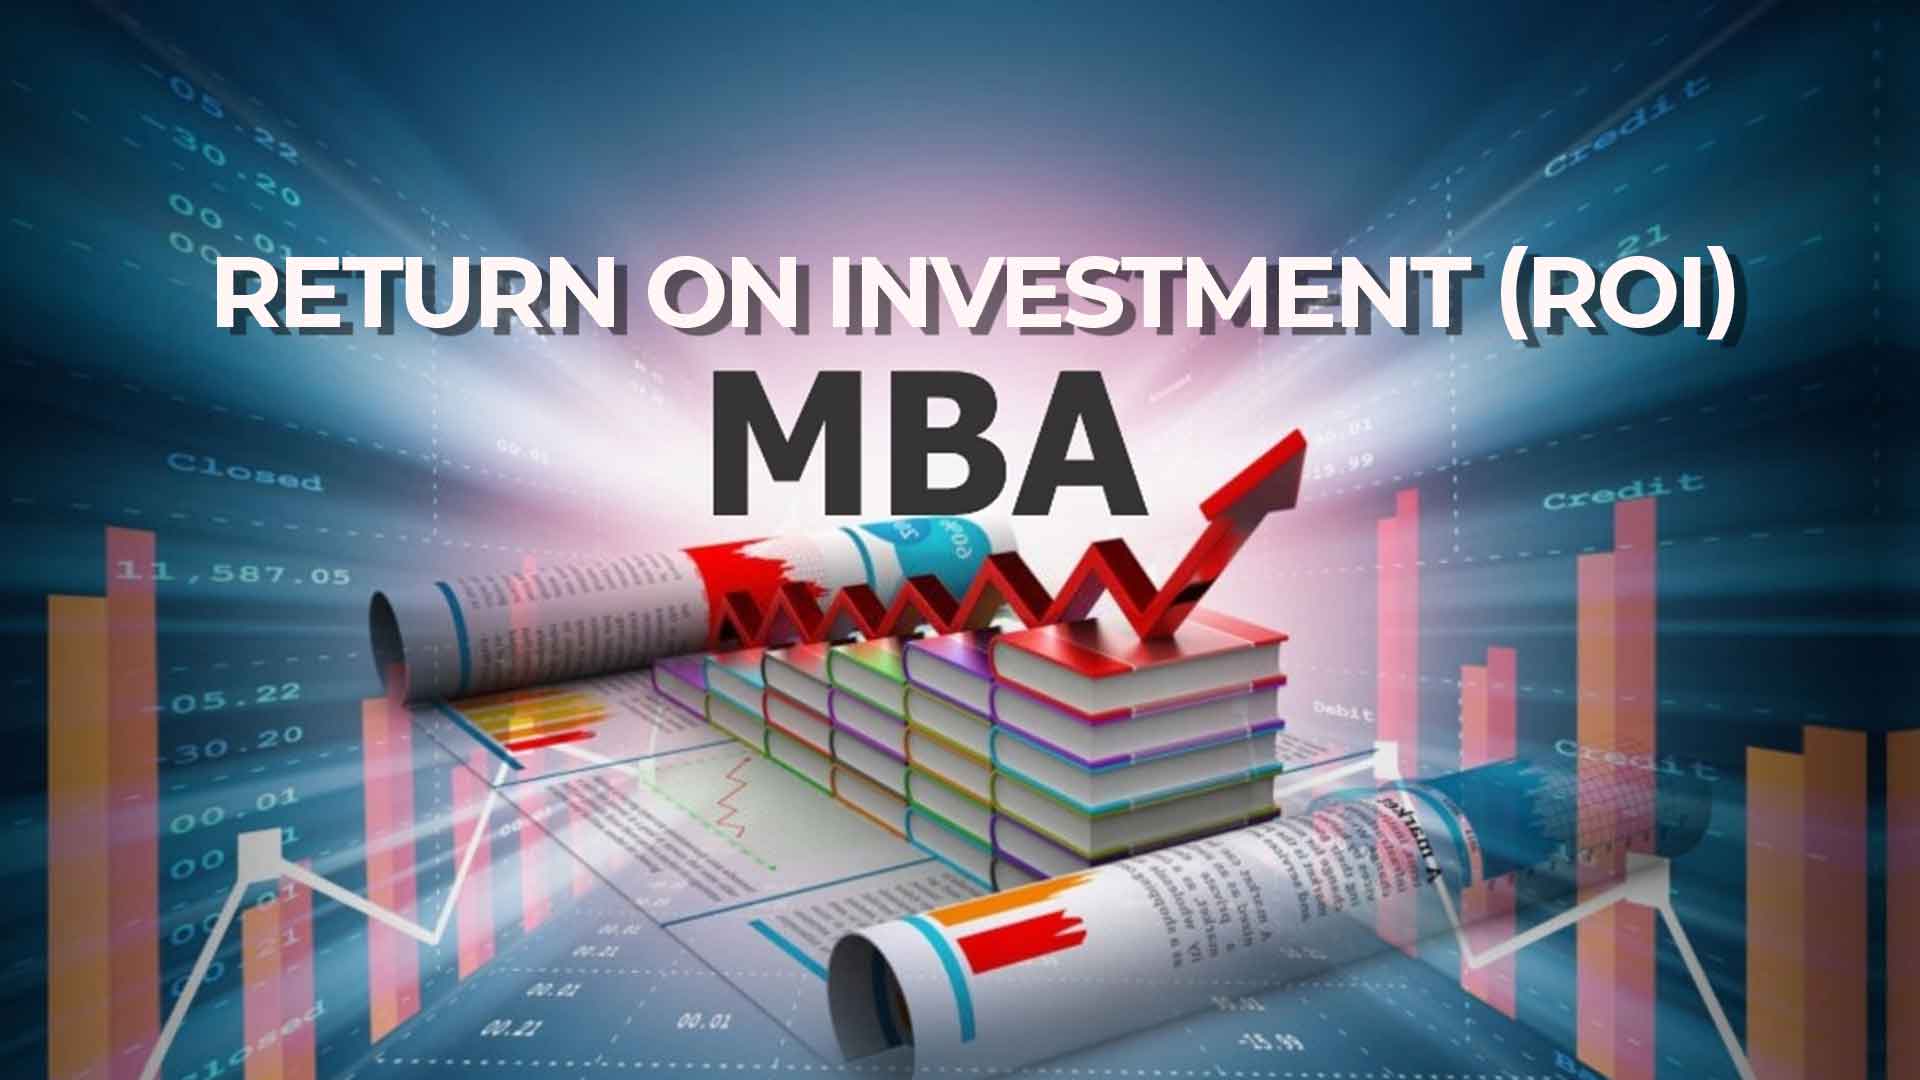 When Is an MBA Worth It? - all about MBA roi